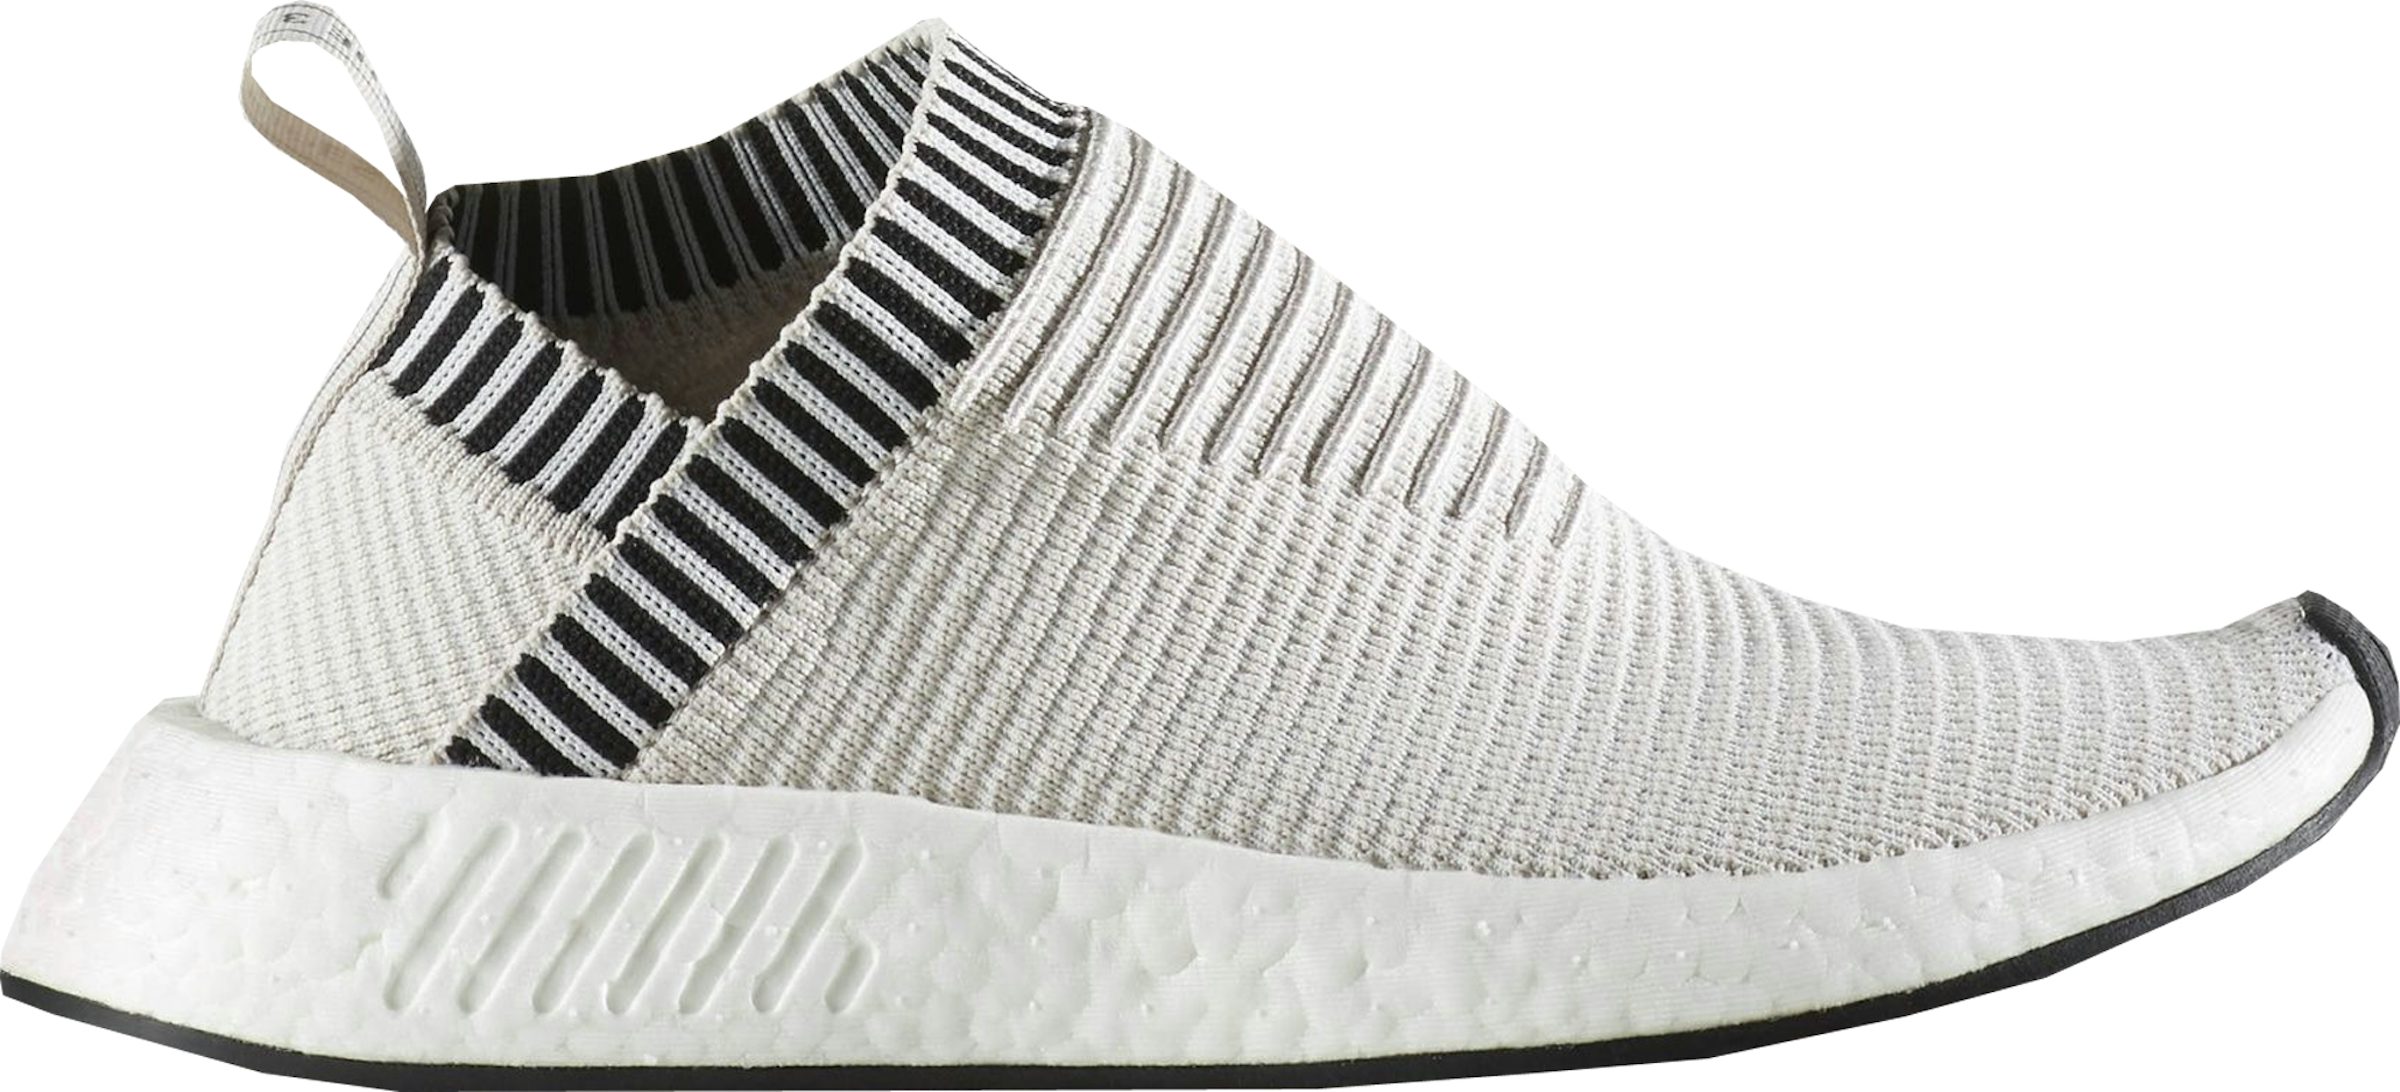 performer global samfund Buy adidas NMD CS2 Shoes & New Sneakers - StockX